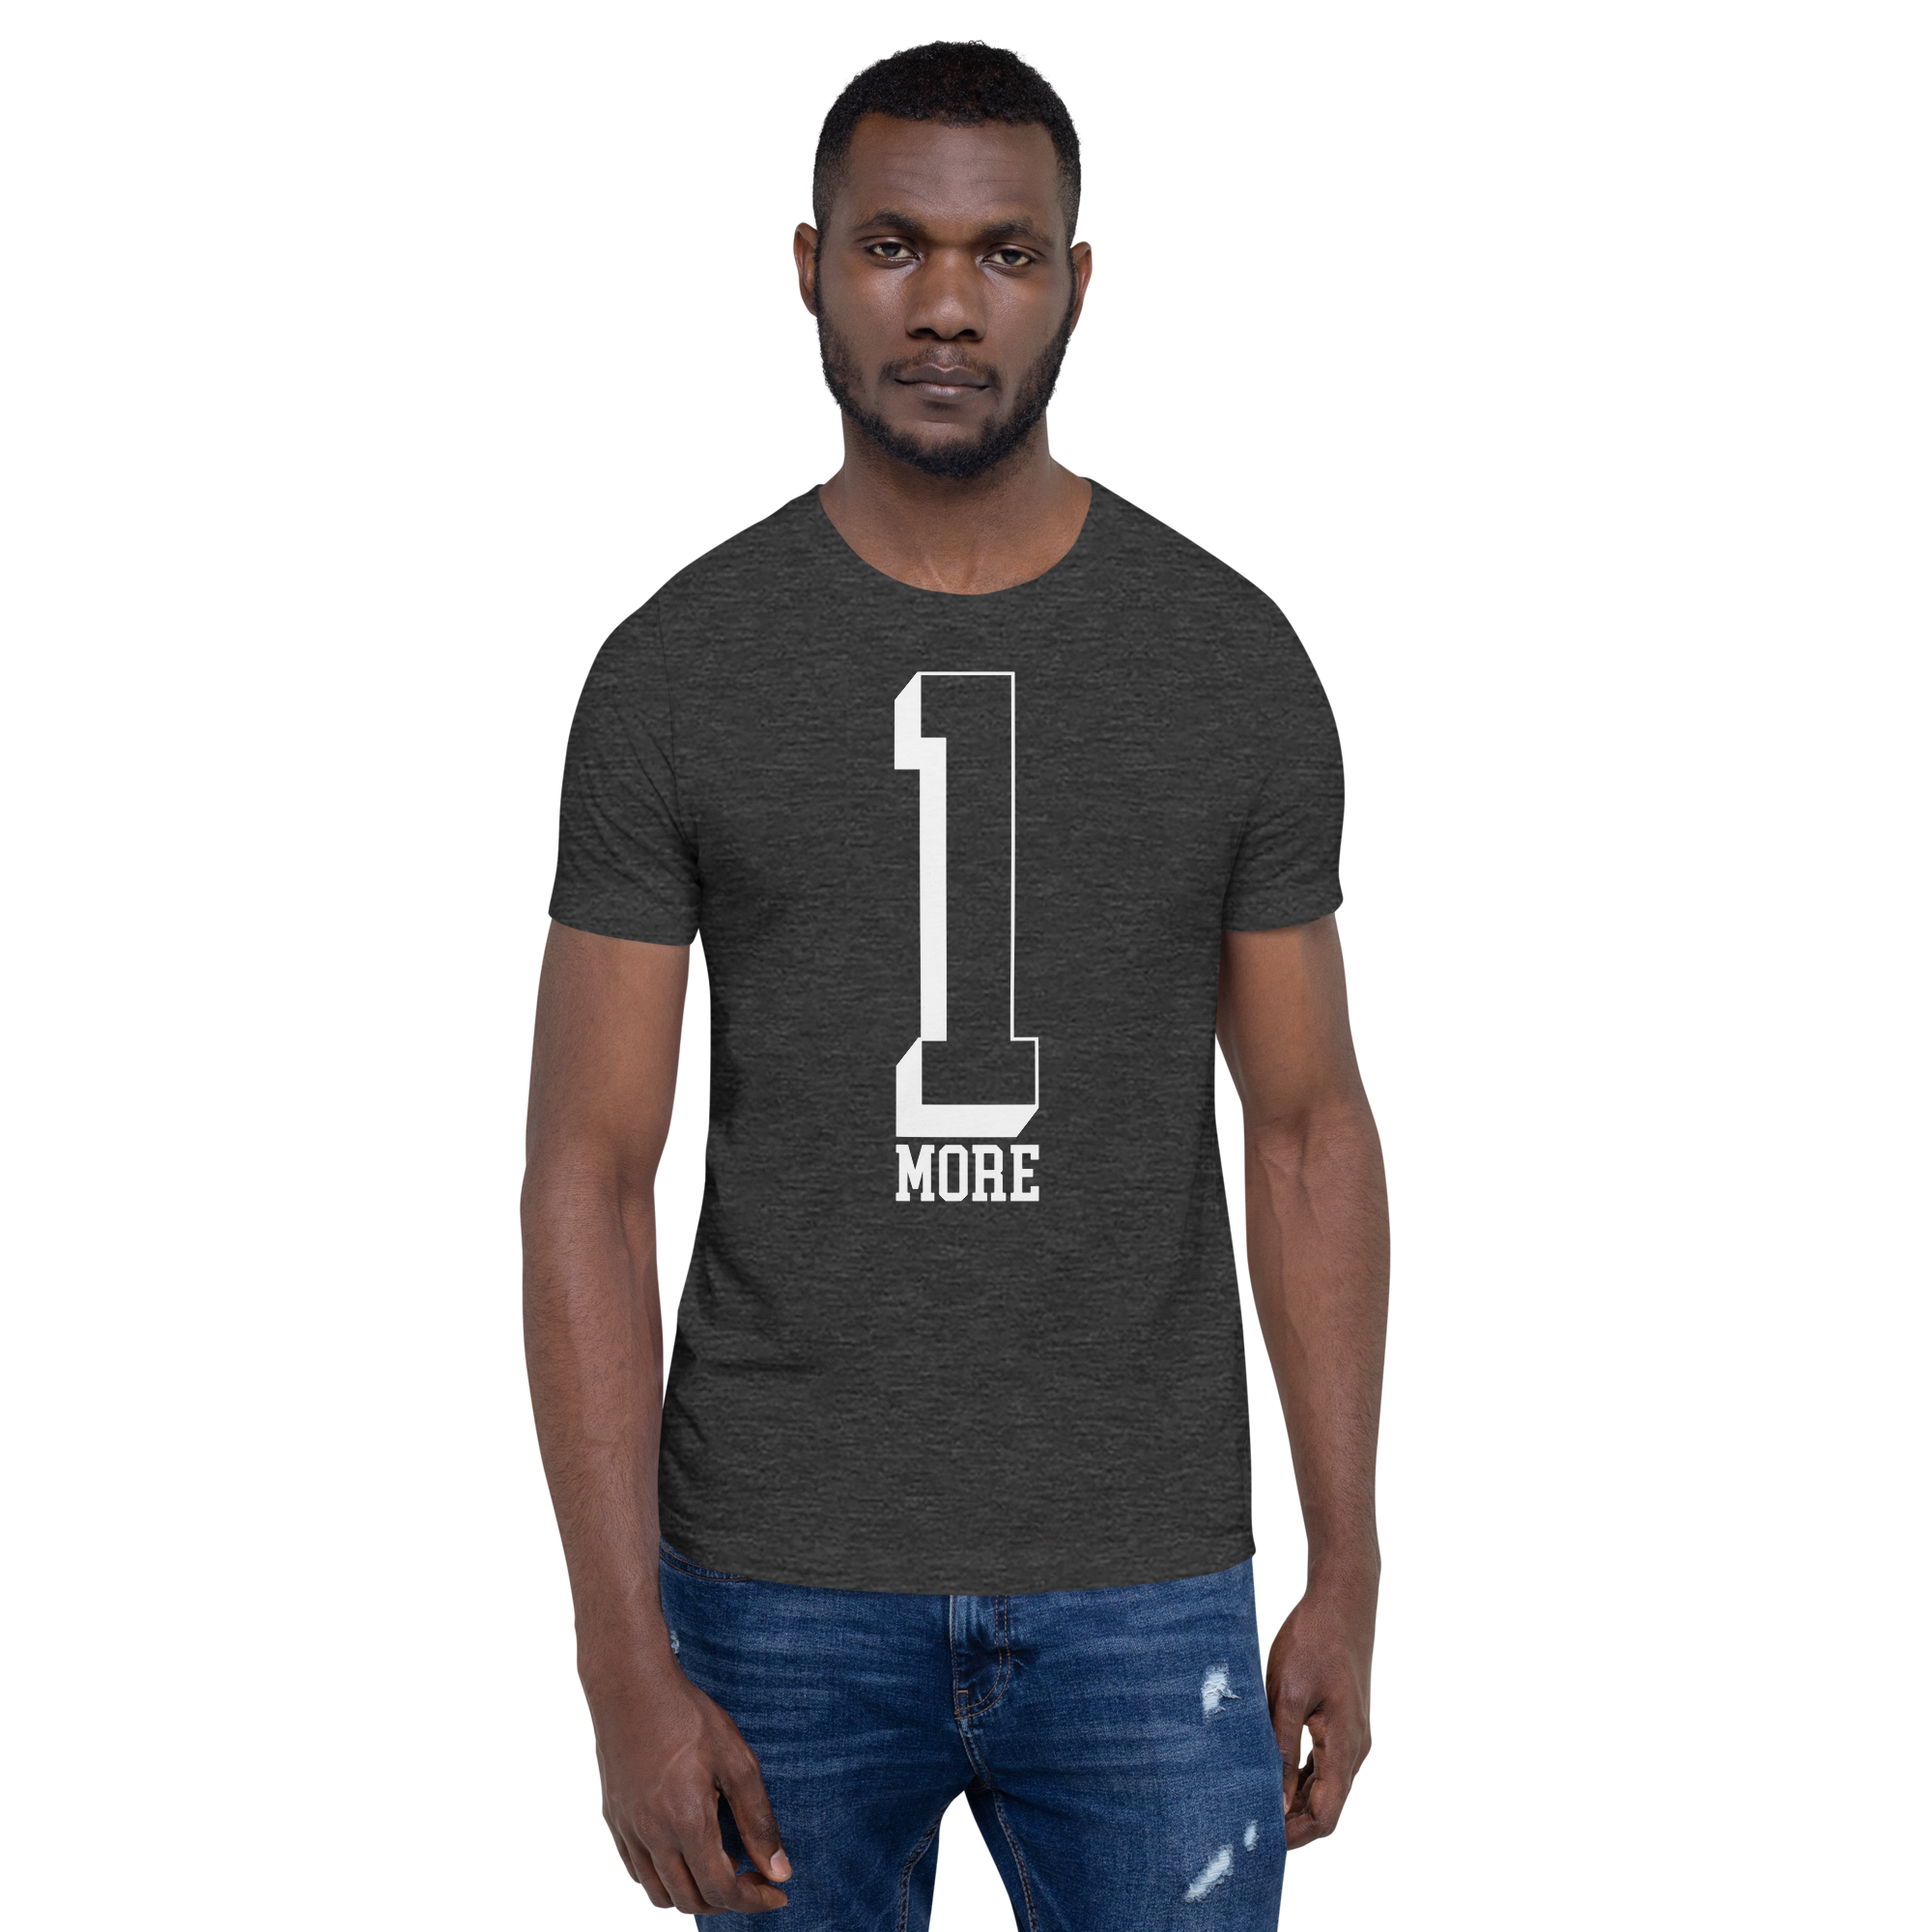 1 More Tee - Workout Graphic T-shirt | Evoke Apparel - front